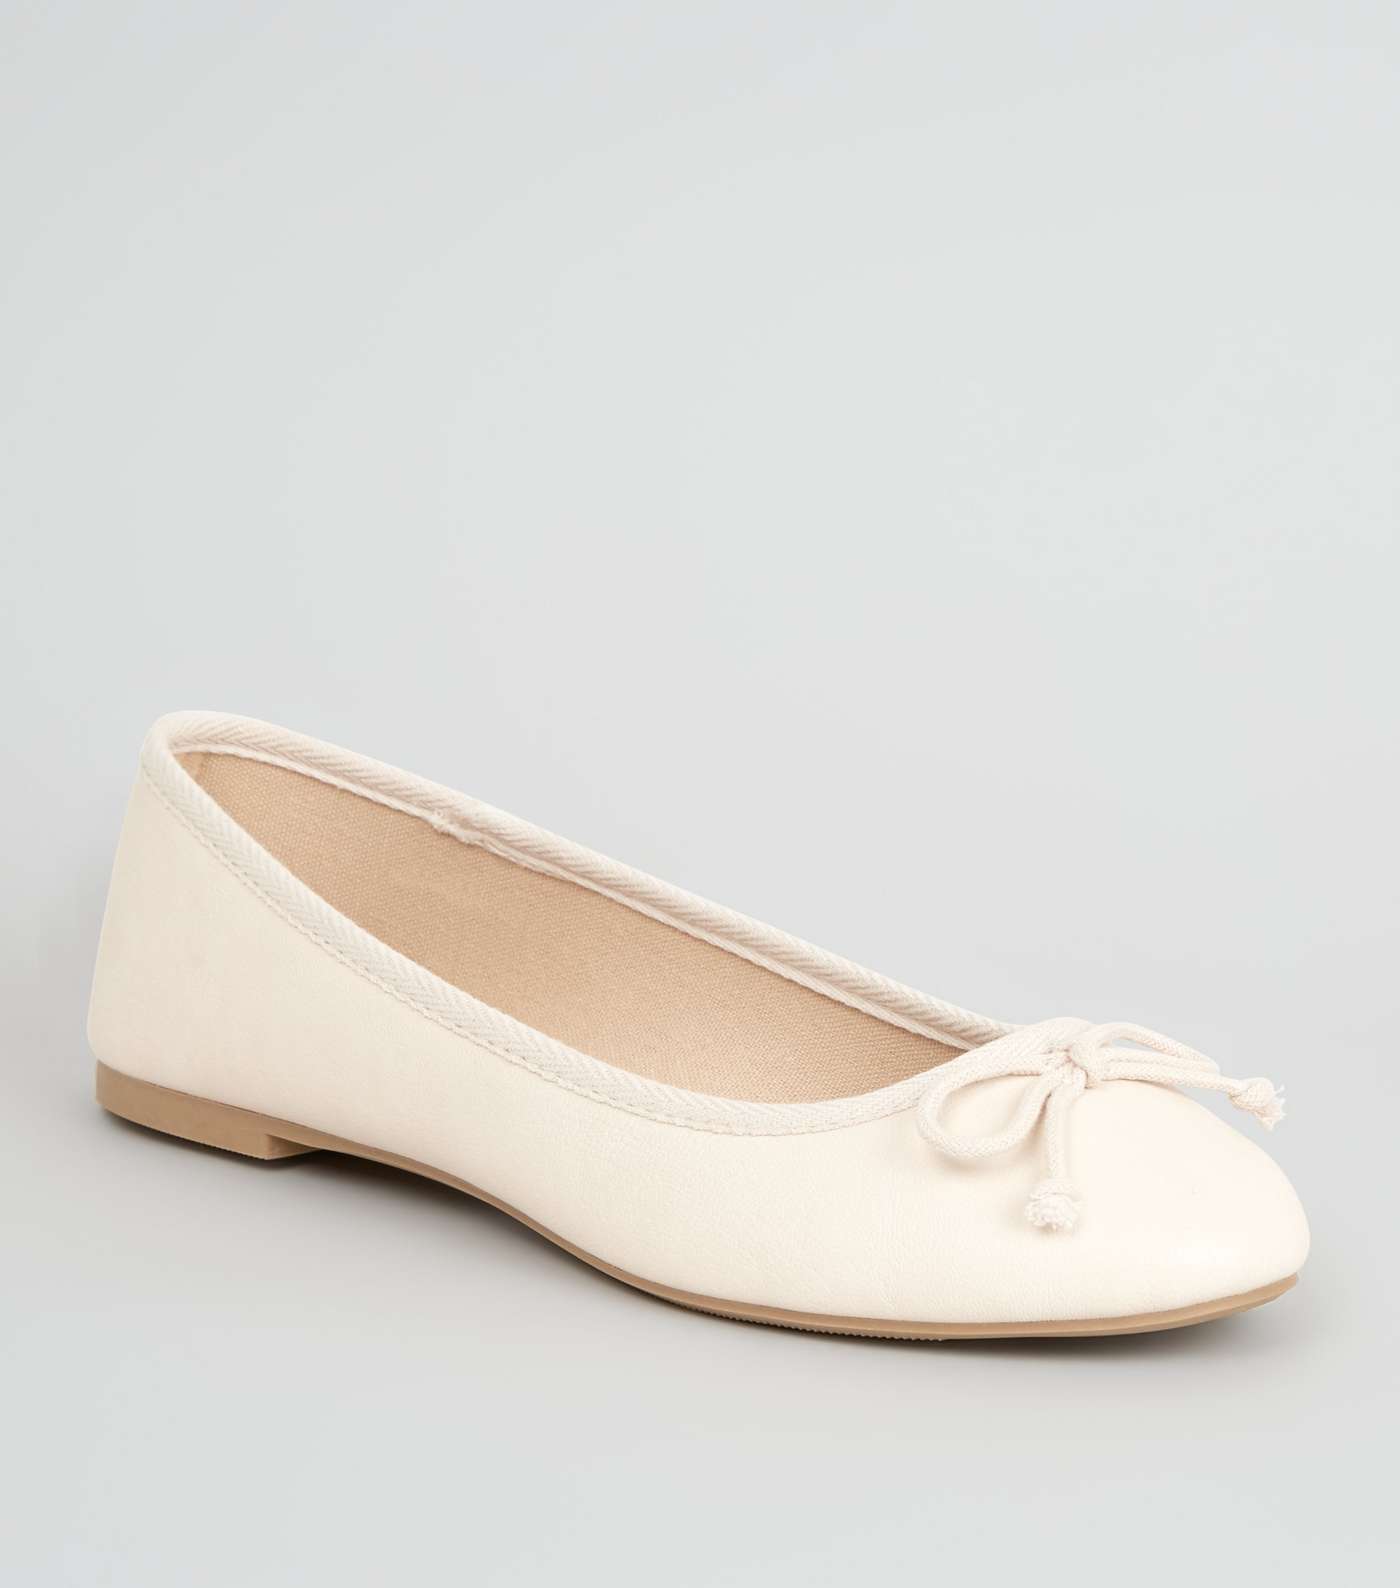 Off White Leather-Look Ballet Pumps